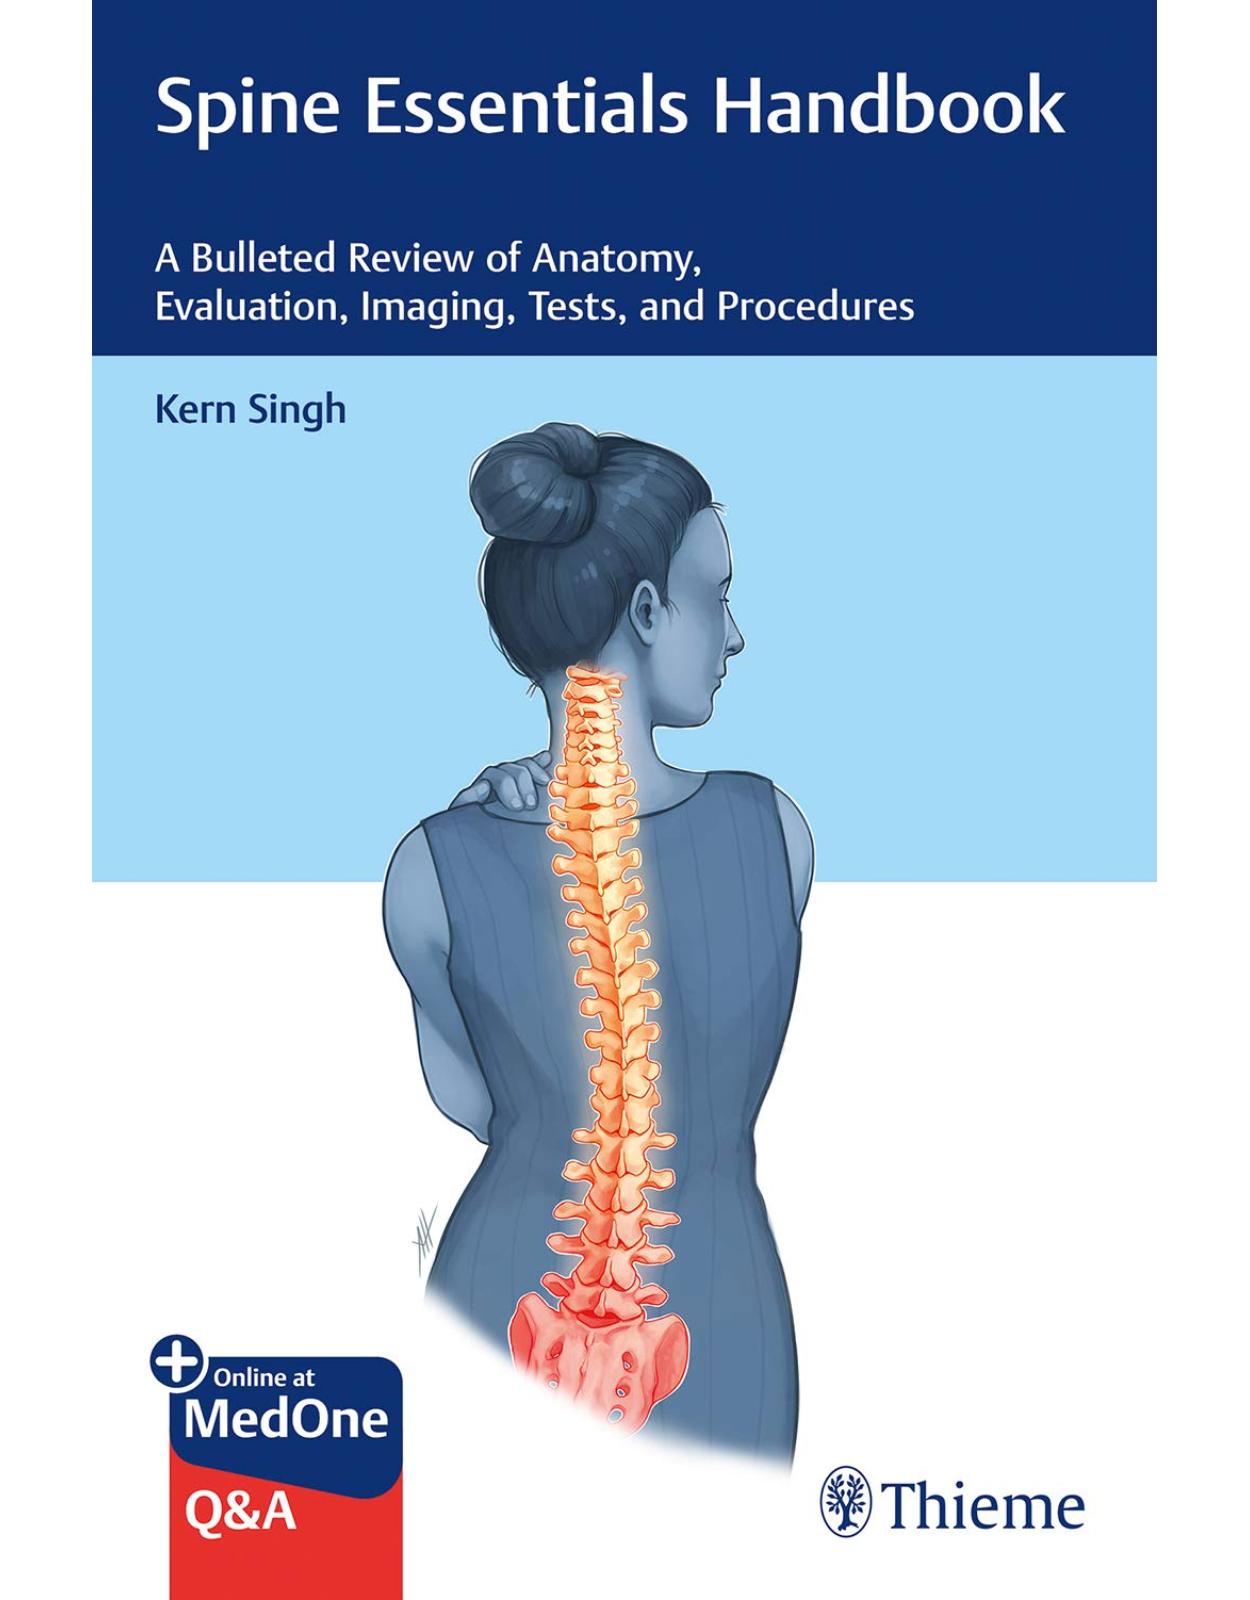 Spine Essentials Handbook: A Bulleted Review of Anatomy, Evaluation, Imaging, Tests, and Procedures